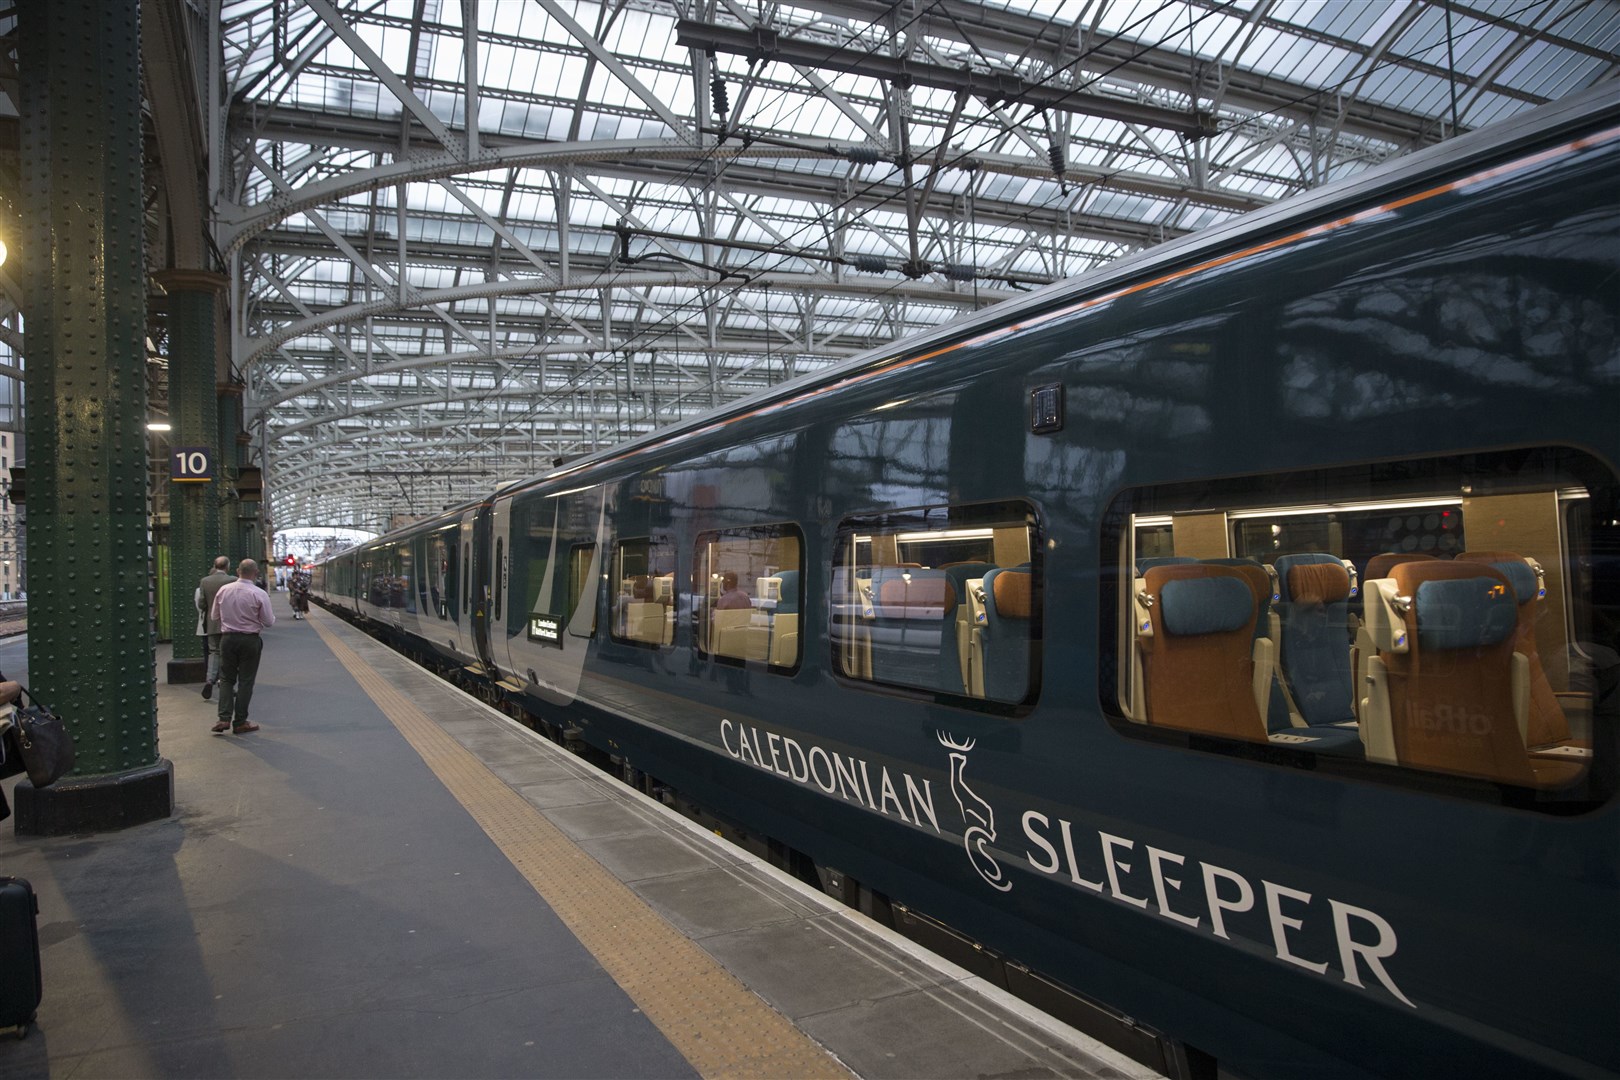 An announcement about the future of the Caledonian Sleeper is expected to be made on Thursday.